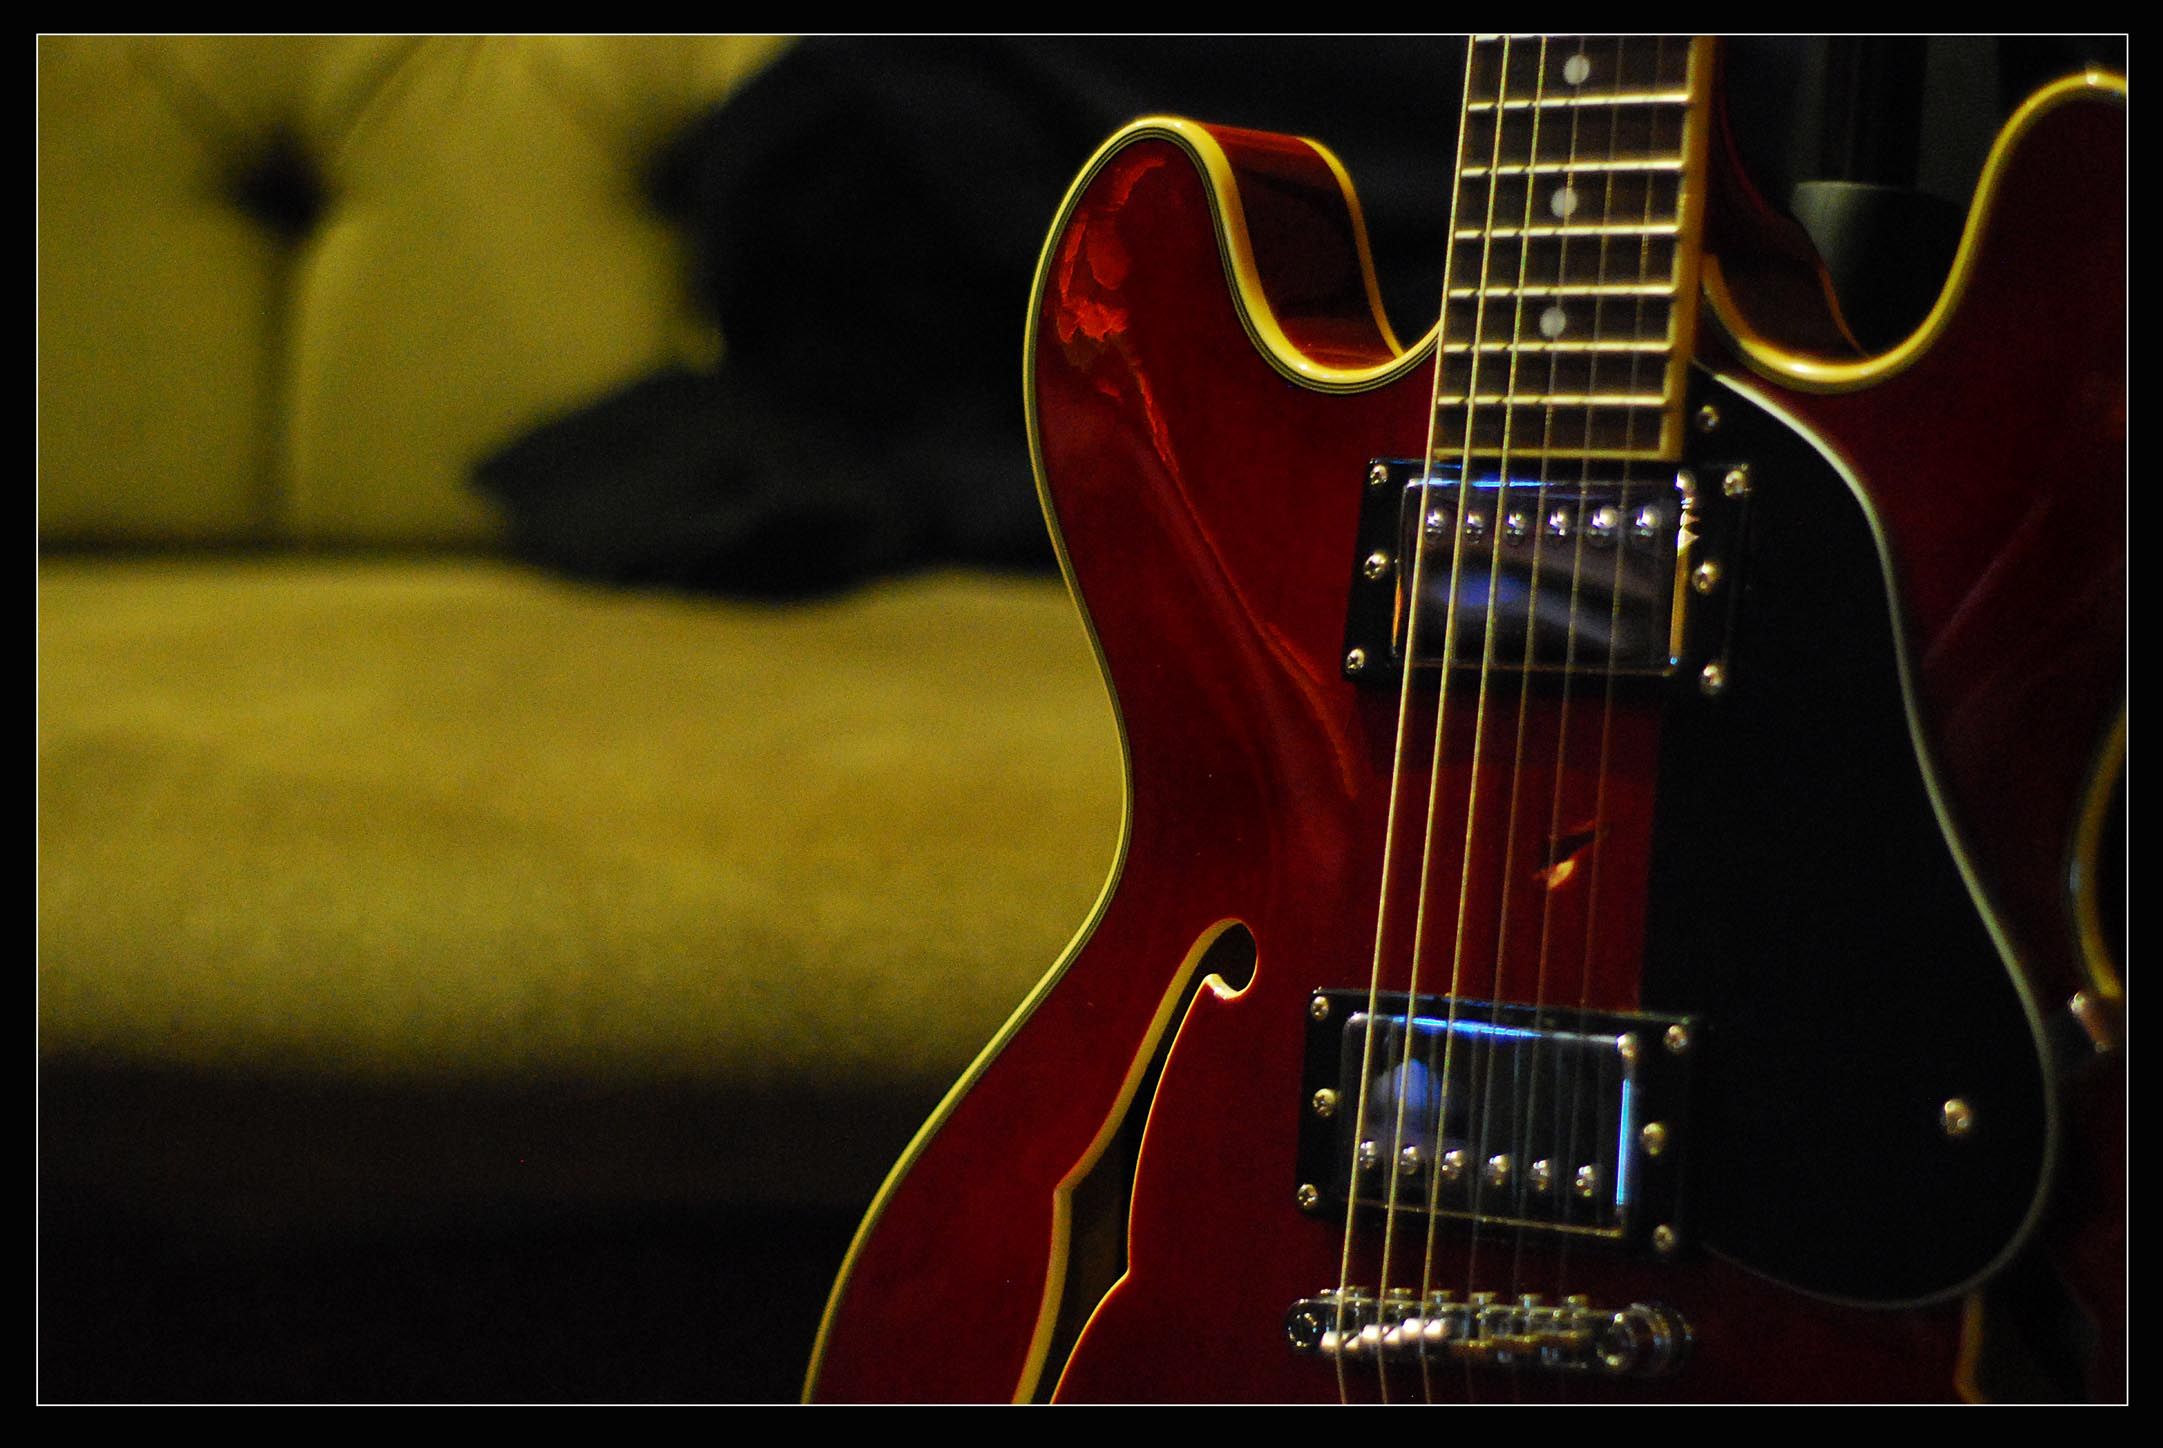 Vintage Red Guitar Wallpaper From